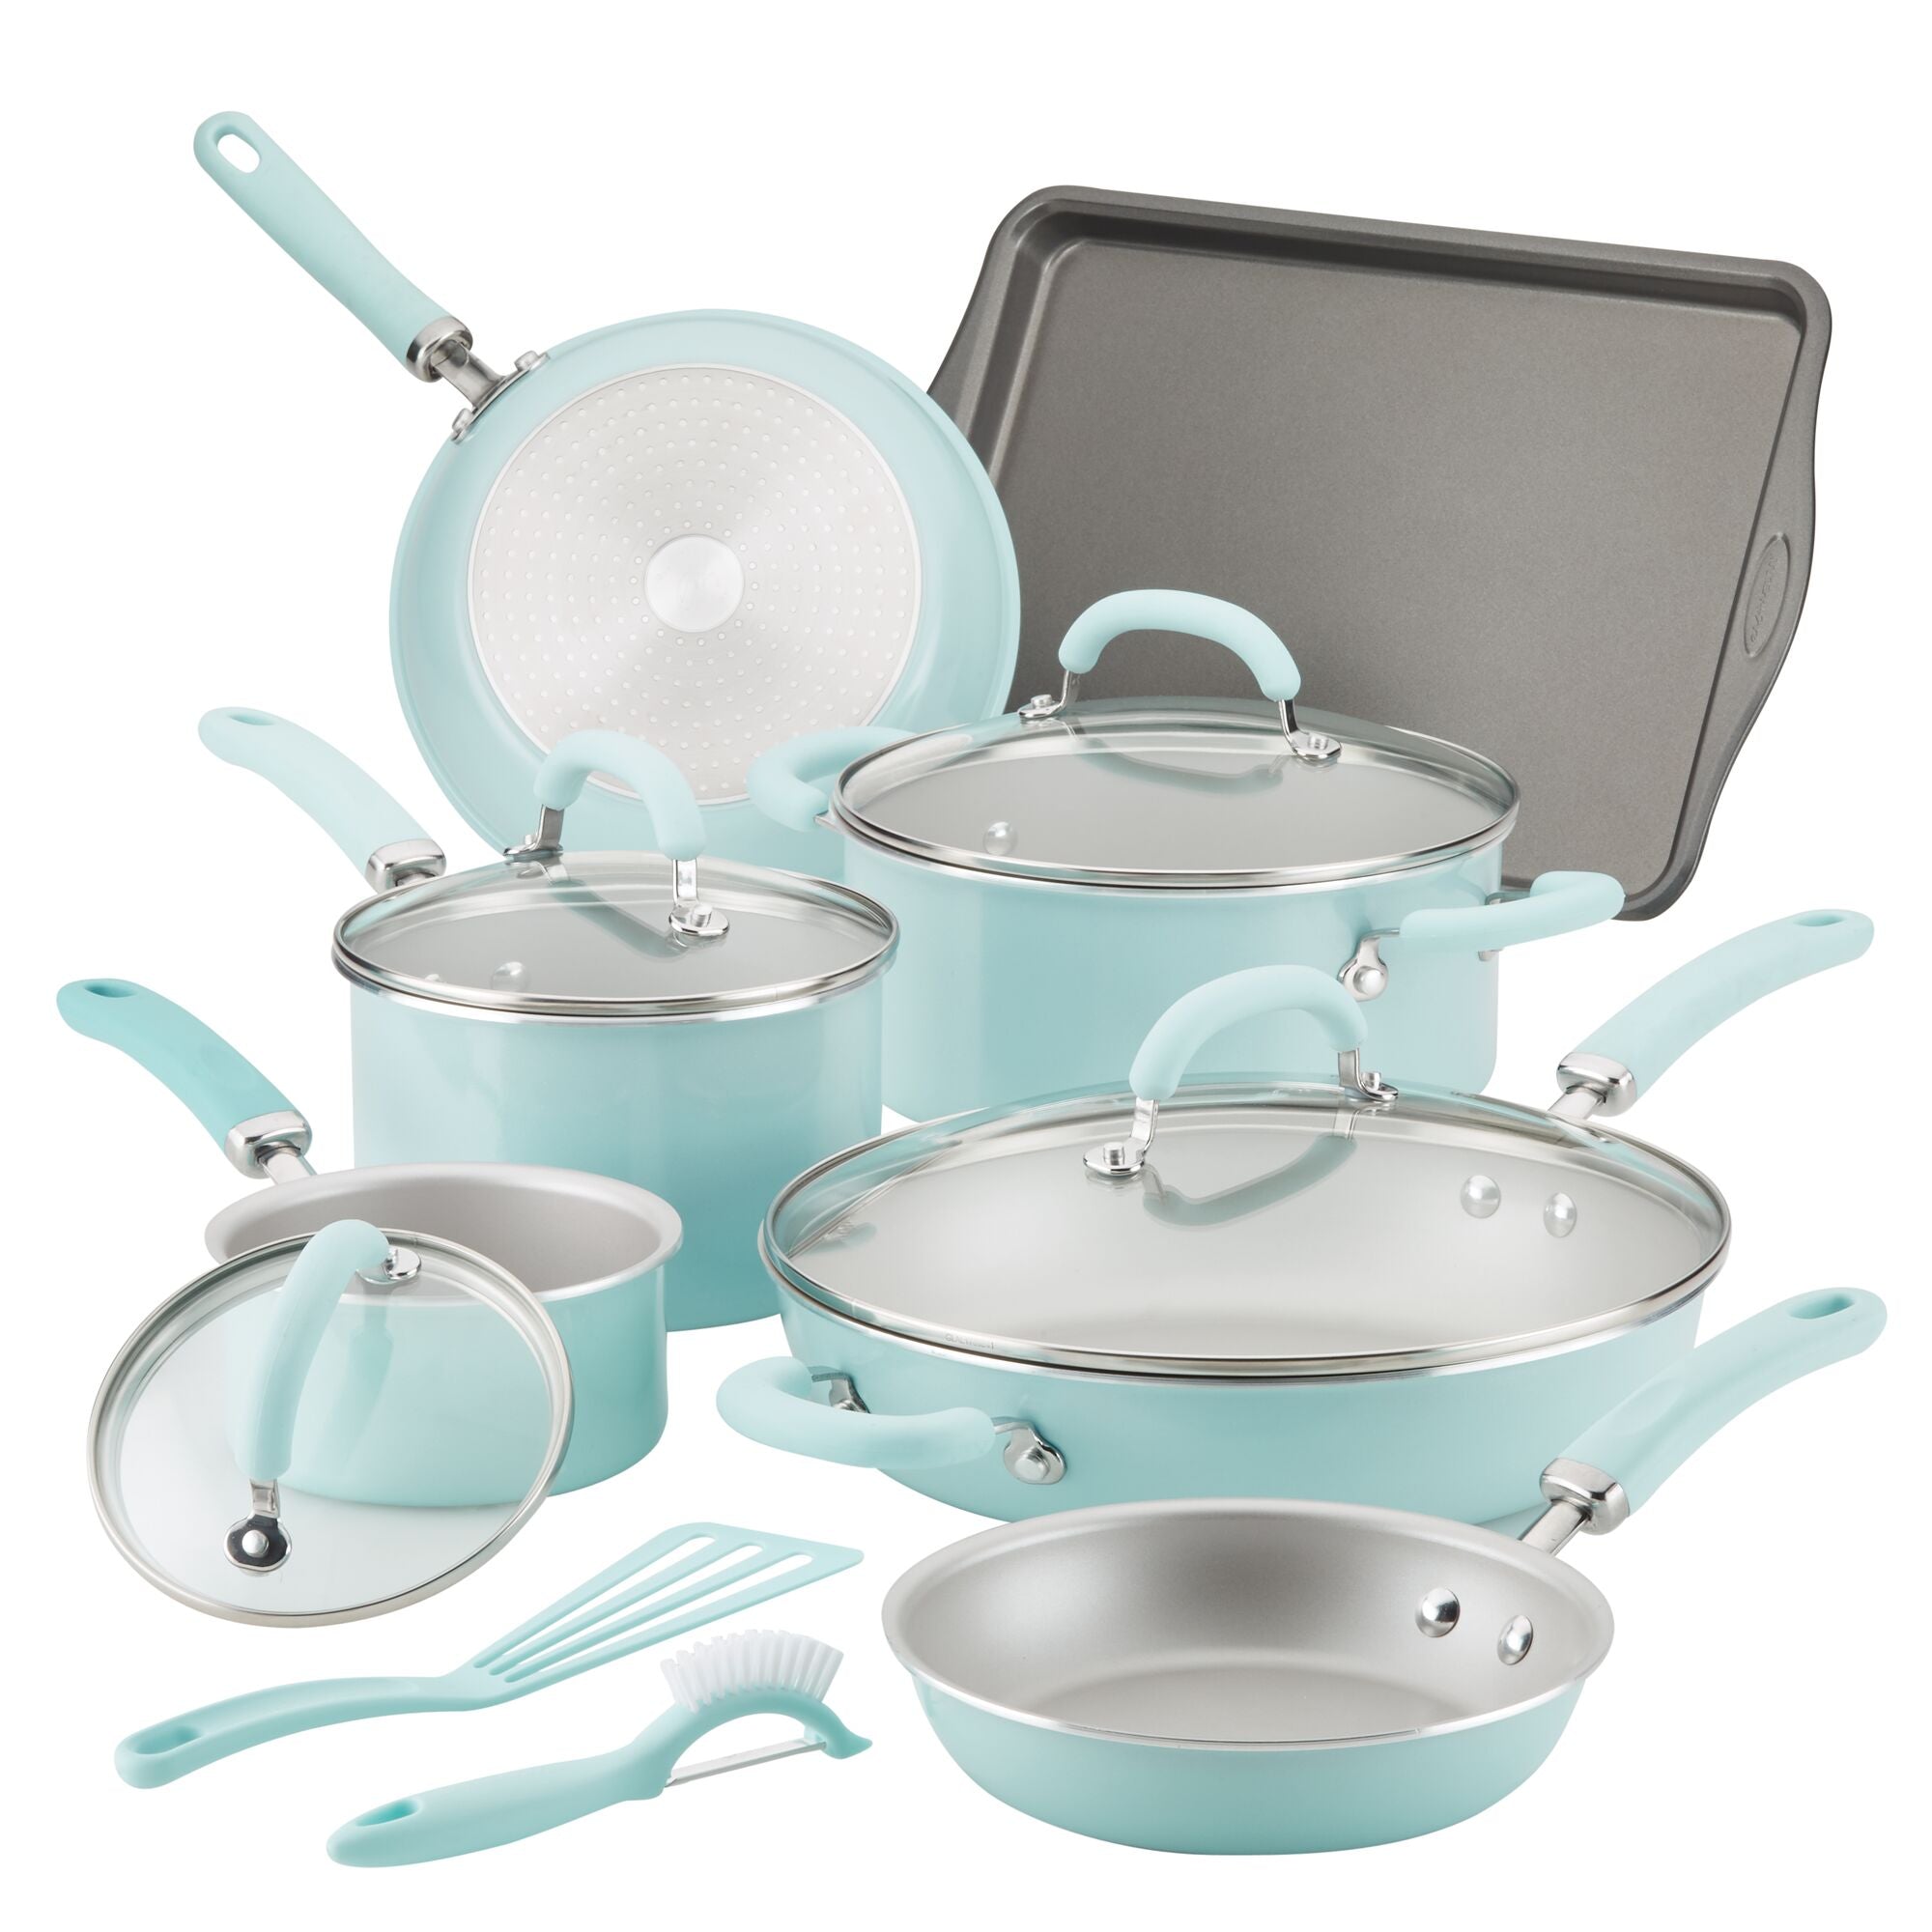 13-Piece Create Delicious Nonstick Induction Cookware Set